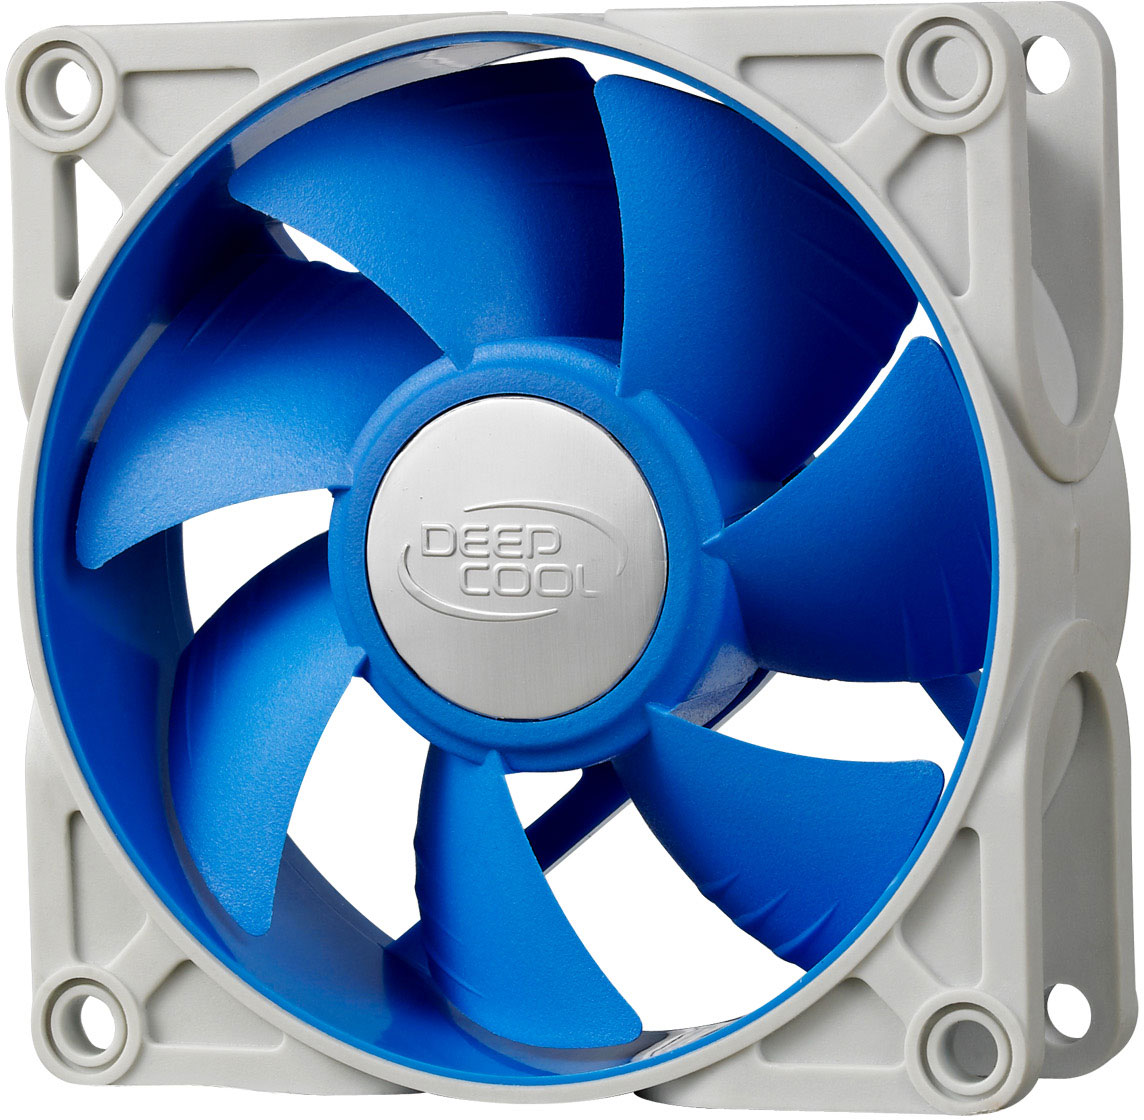 UF-80 Ultra Quiet Fan with Anti-vibration